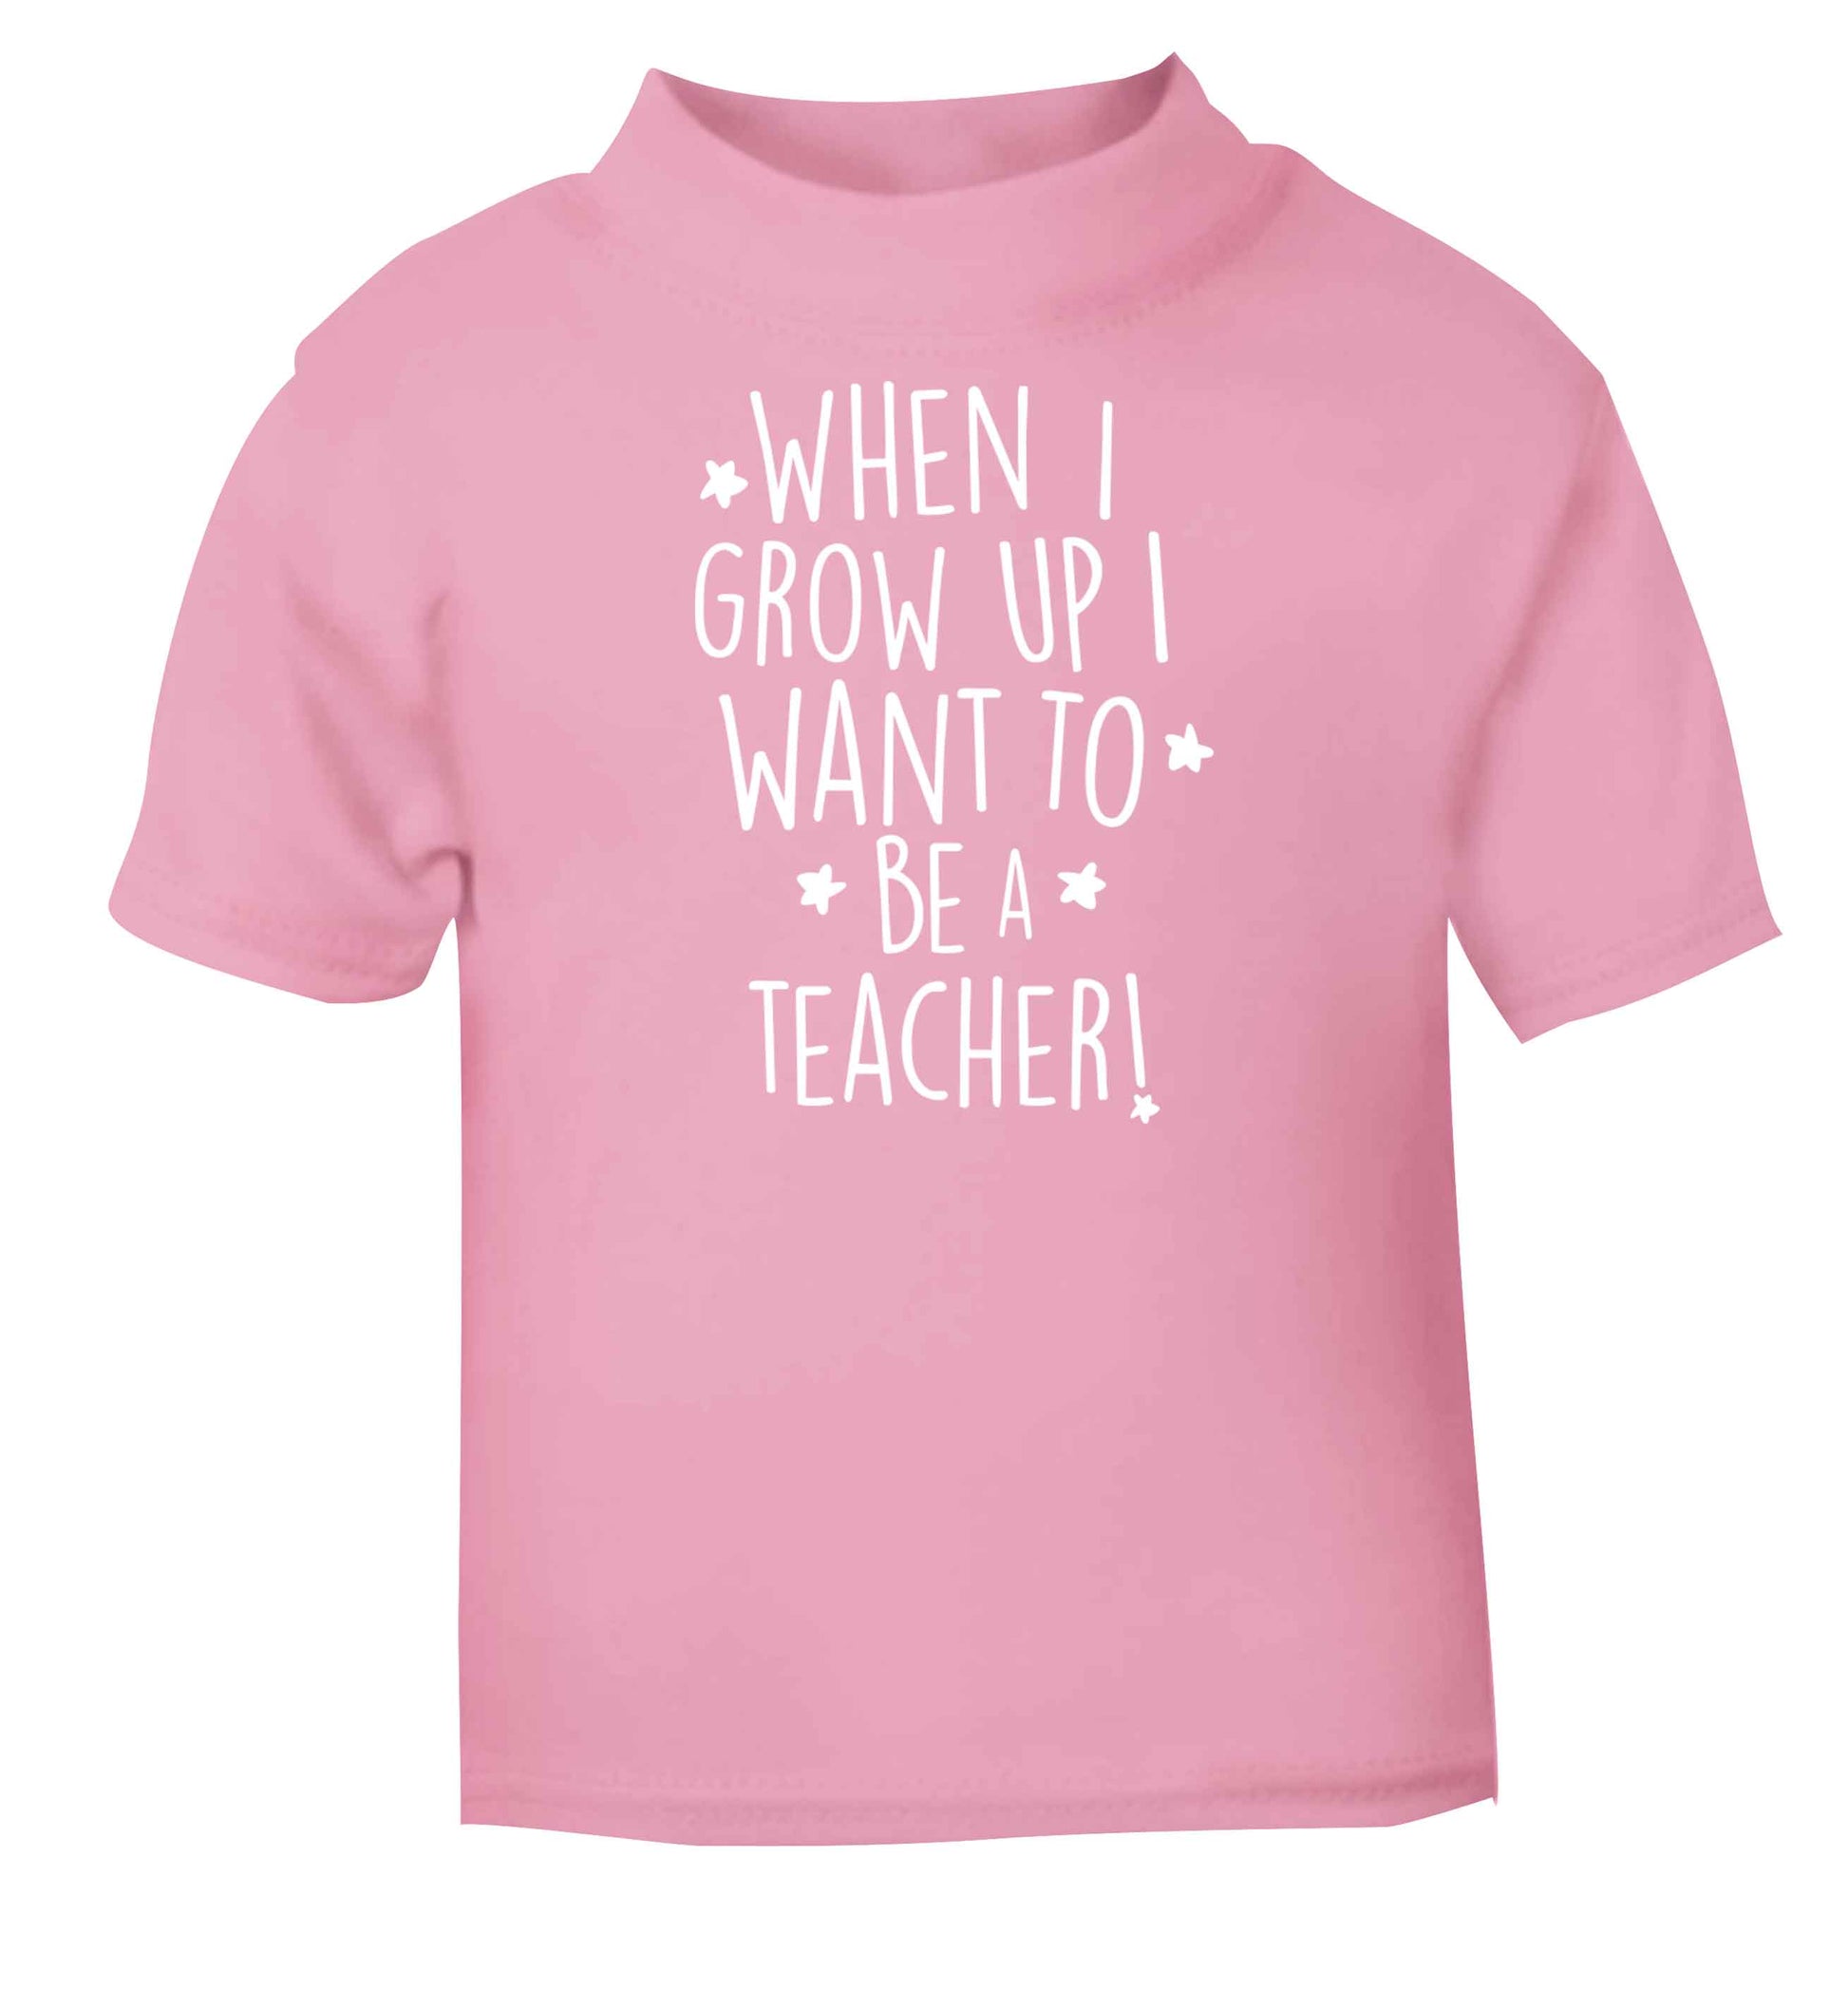 When I grow up I want to be a teacher light pink baby toddler Tshirt 2 Years